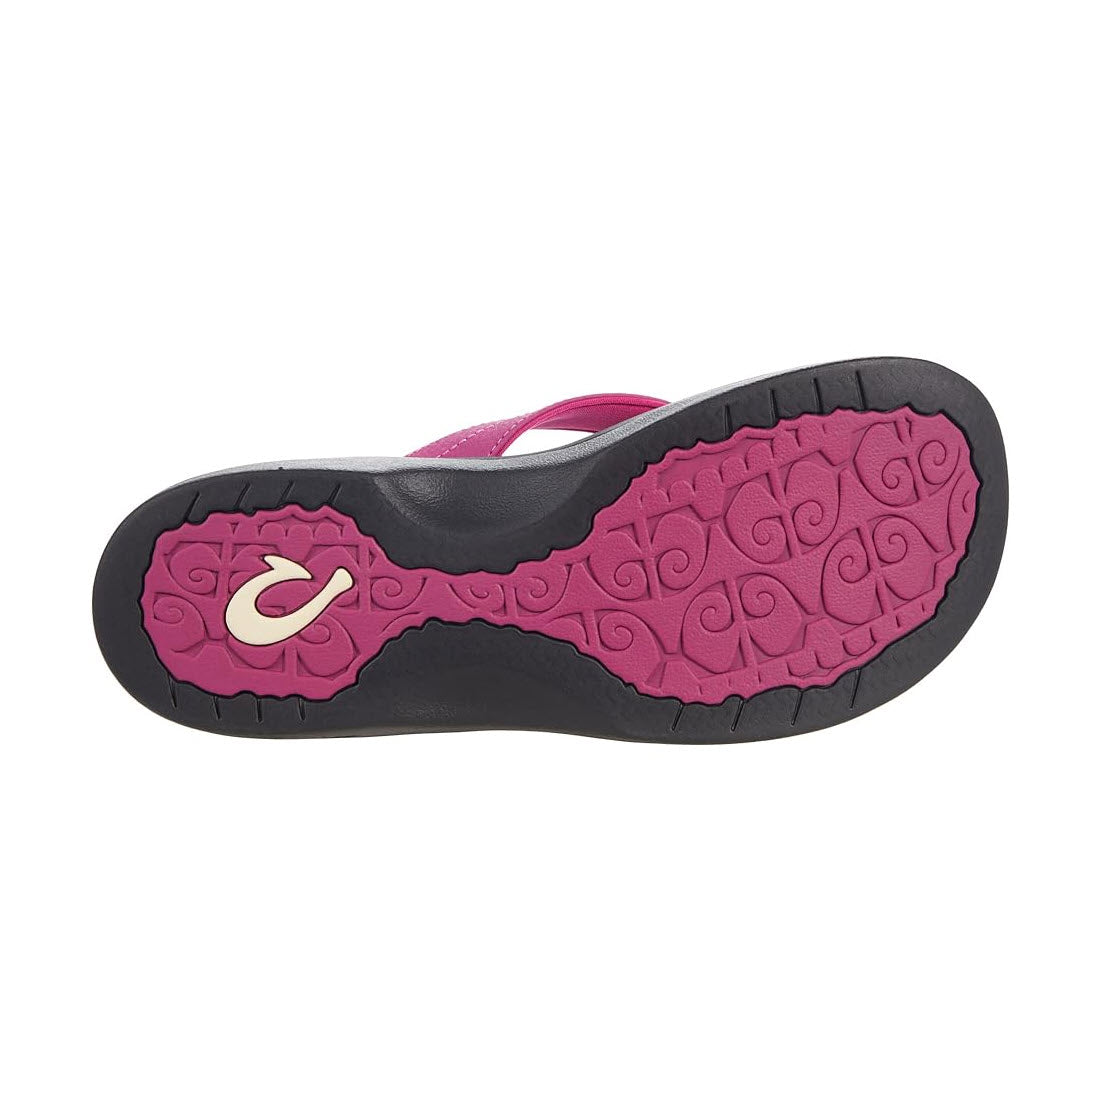 Bottom view of an Olukai Ohana Orchid Flower - Womens shoe showing its pink textured sole with a circular Olukai logo design, ideal for a water-resistant sandal.